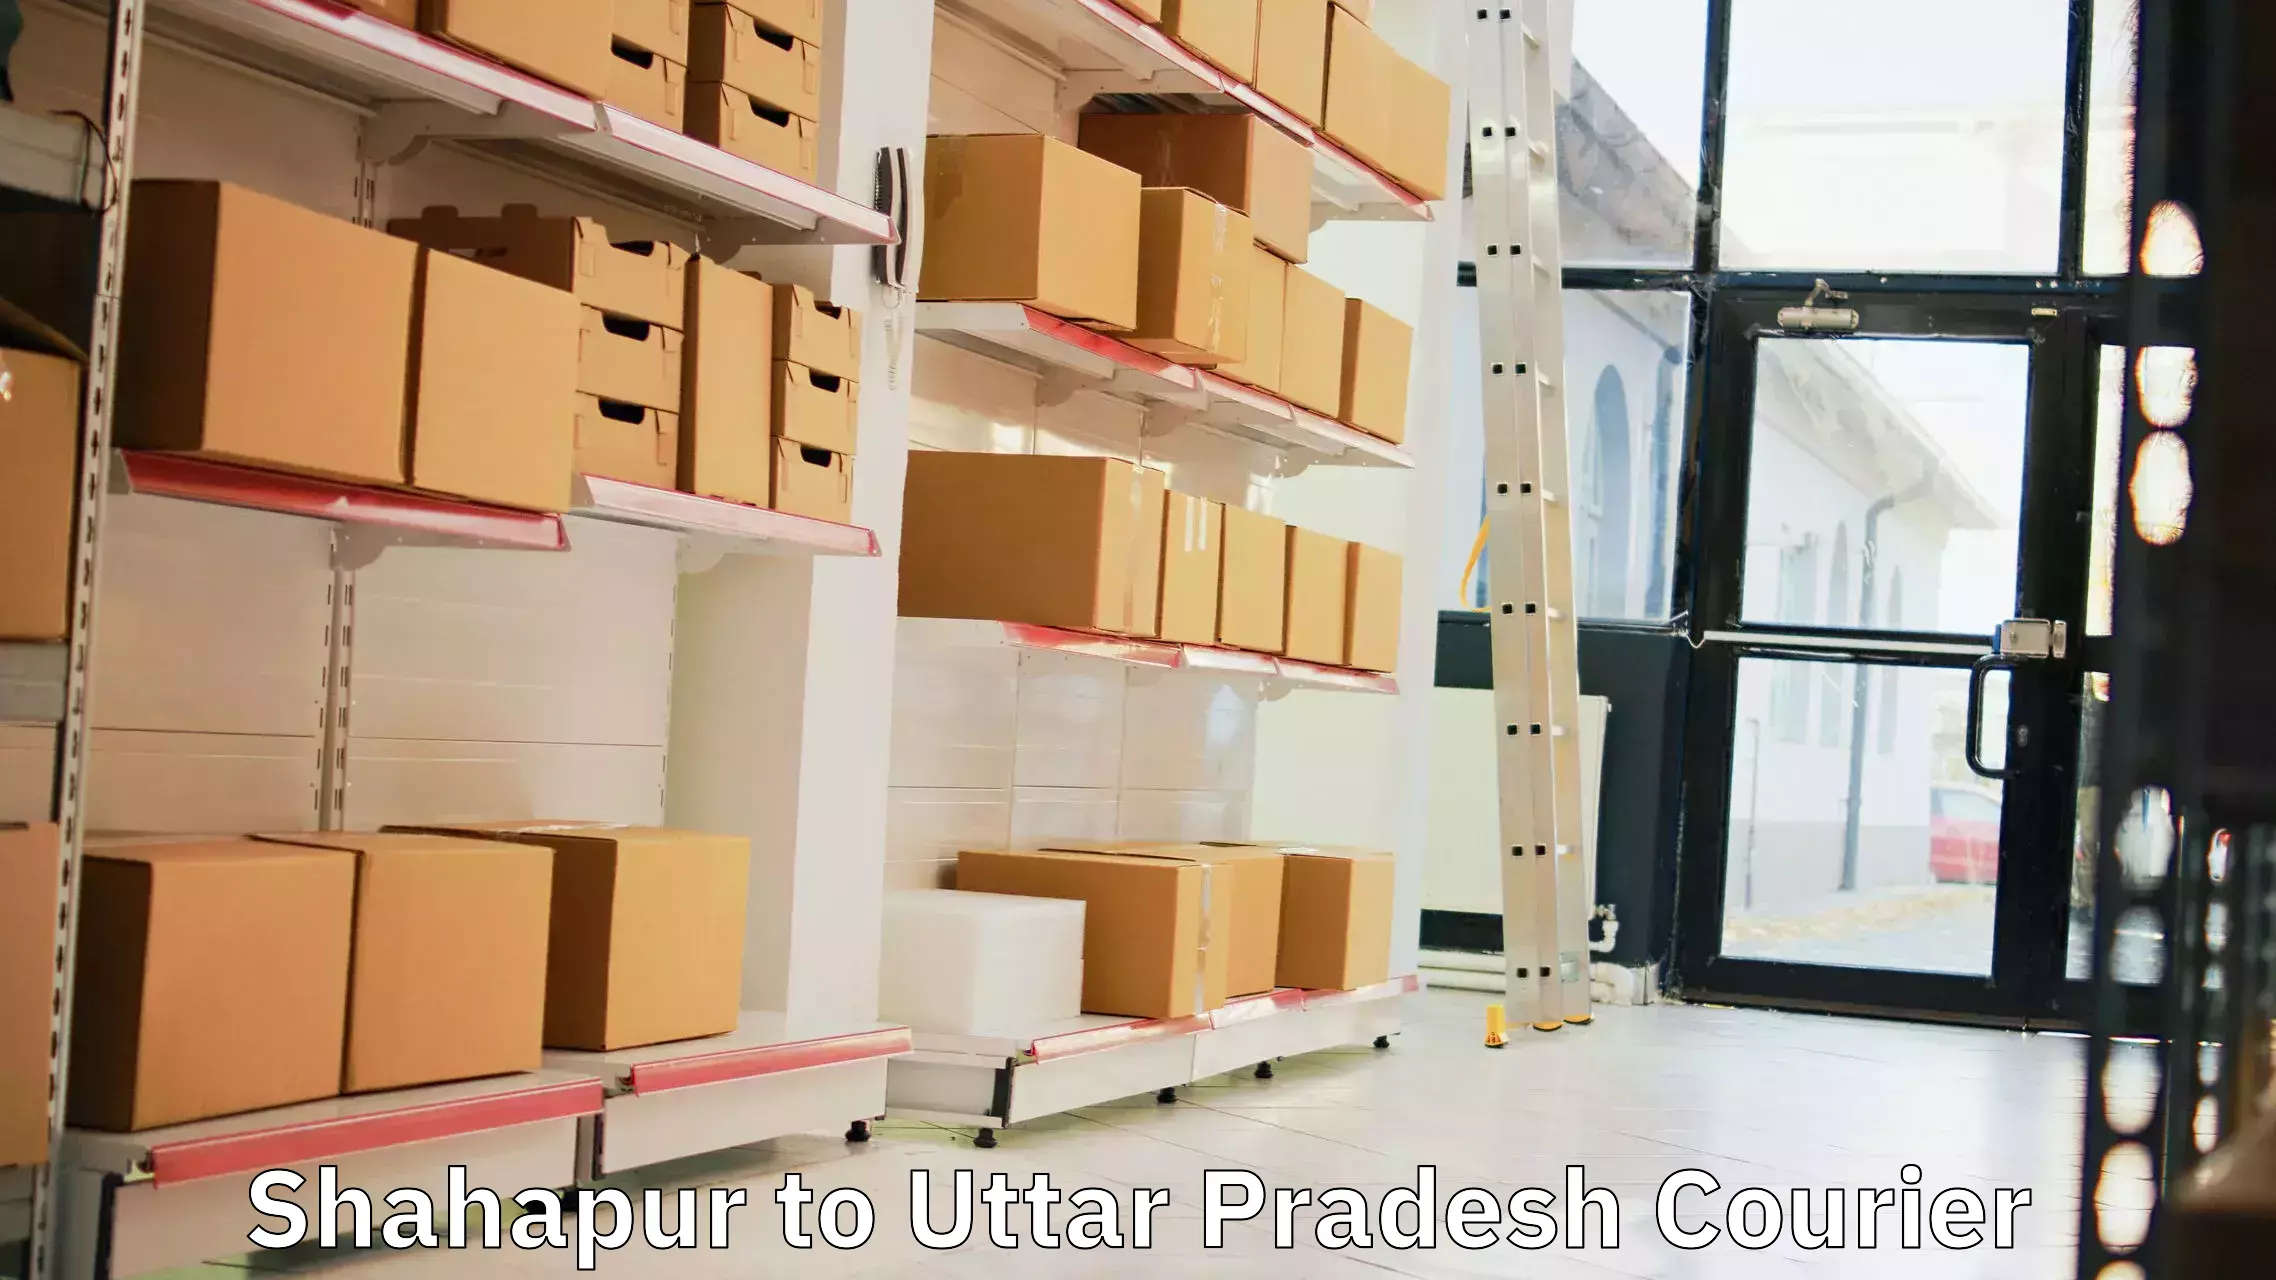 User-friendly courier app Shahapur to Aligarh